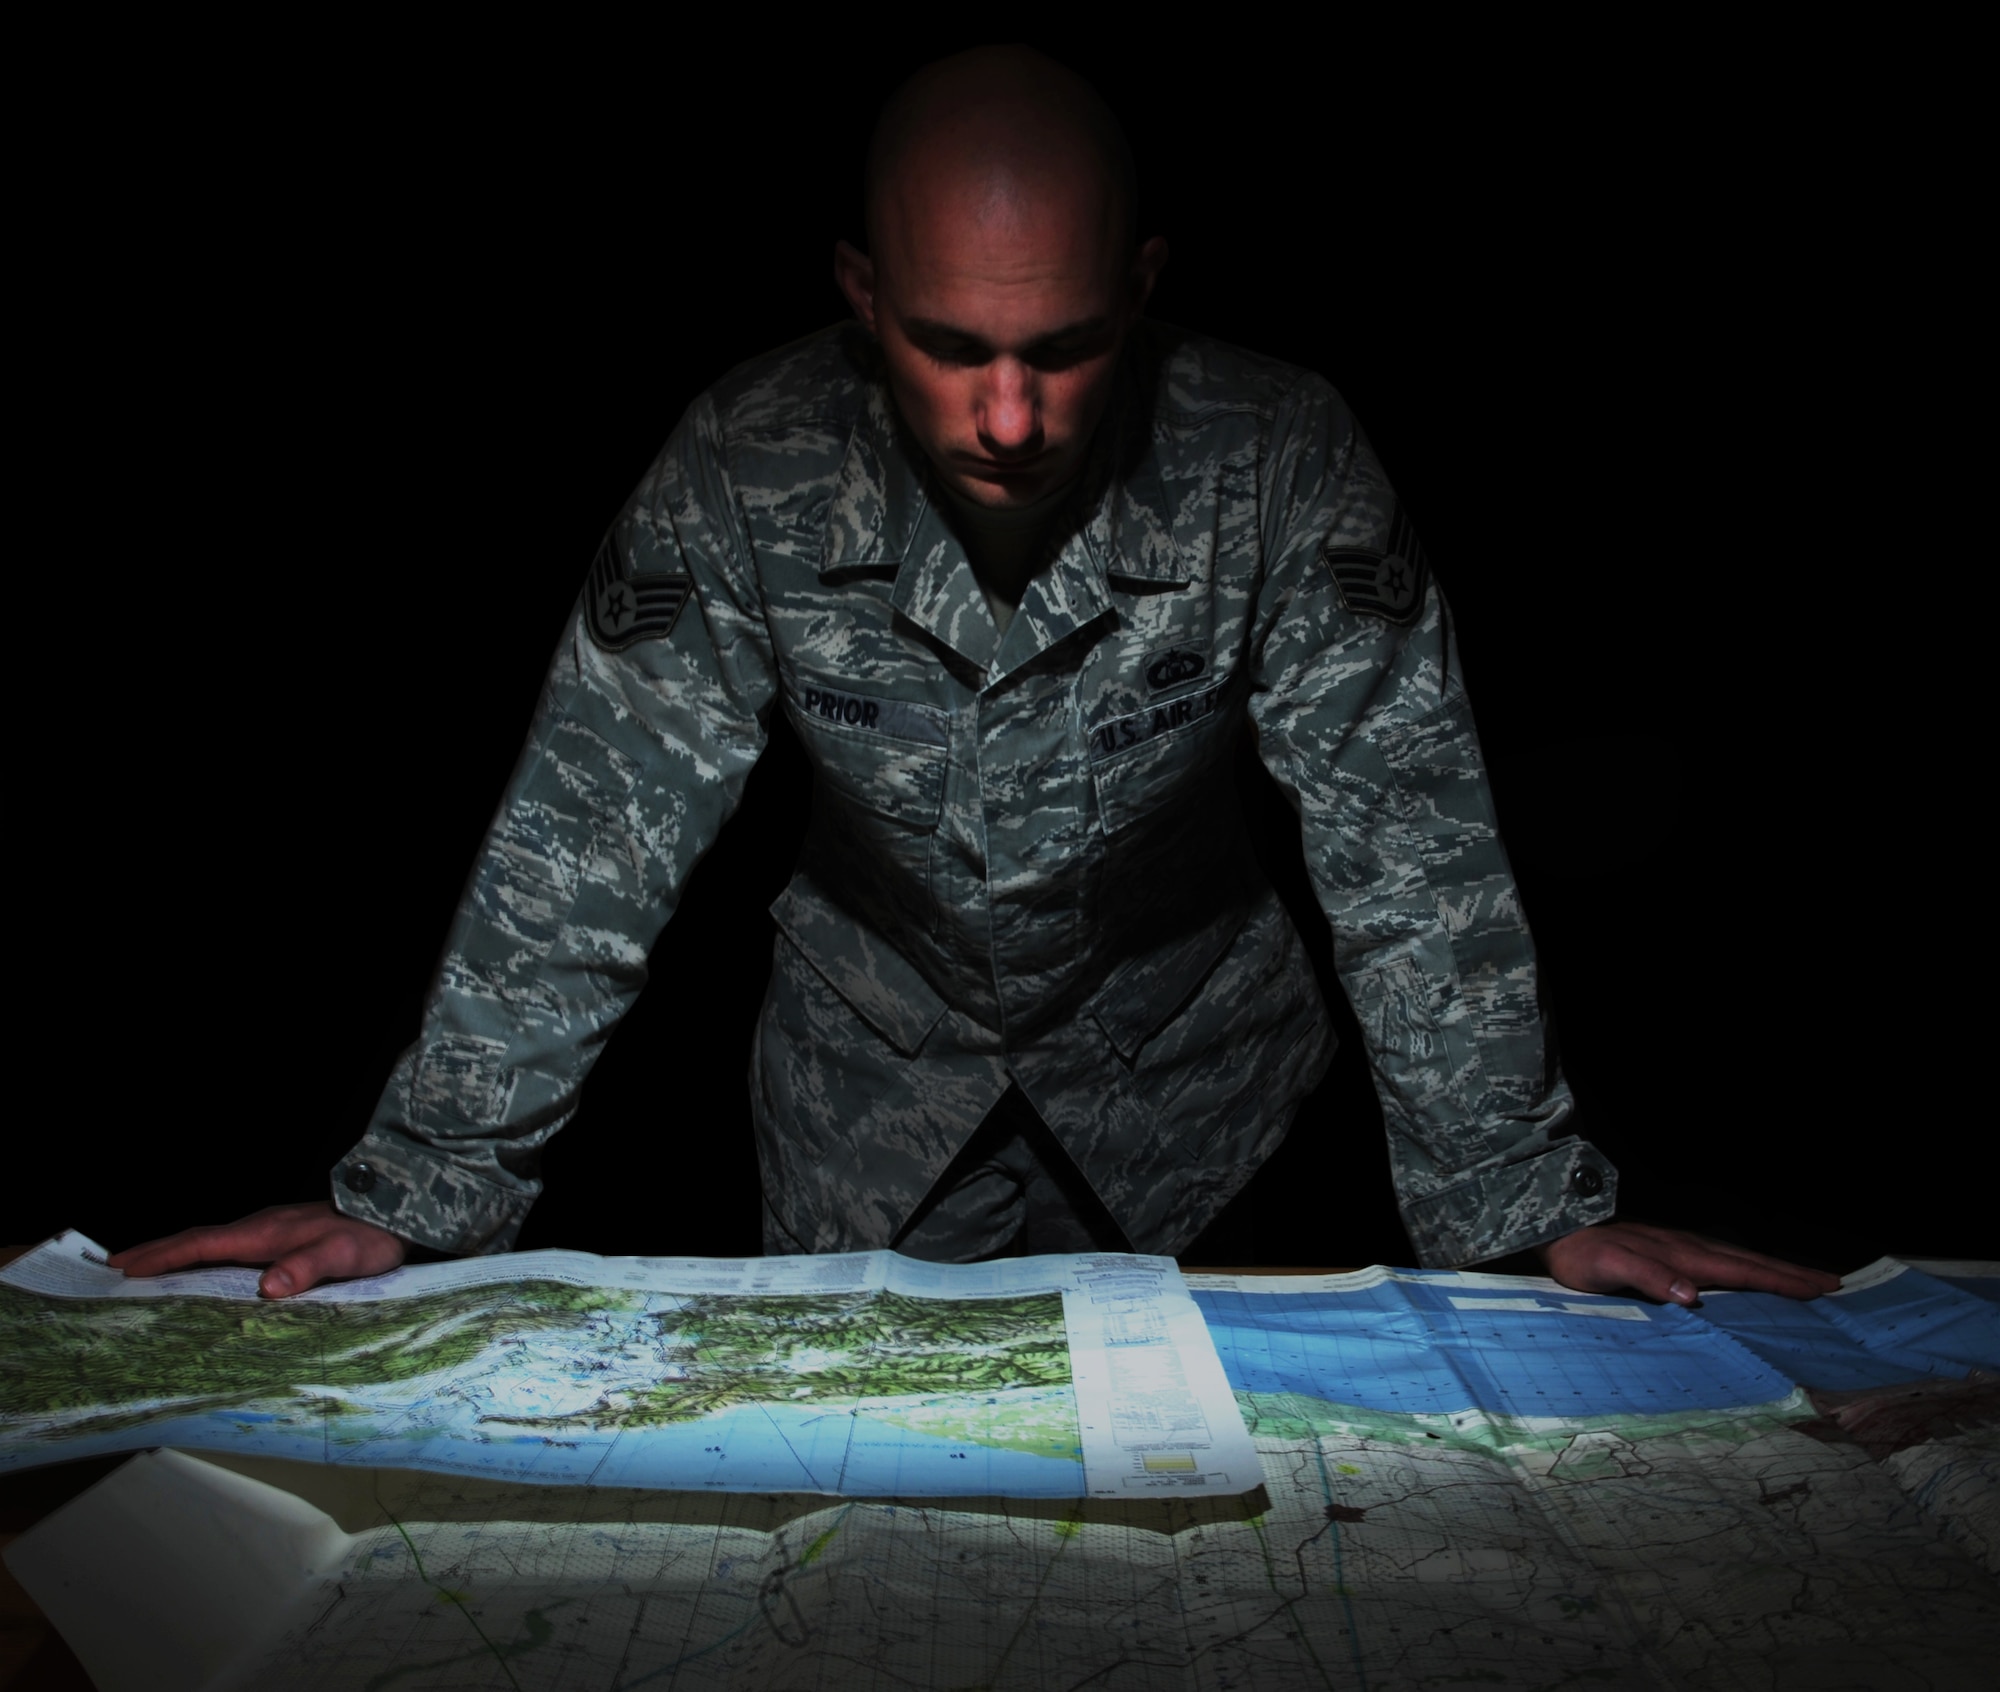 Staff Sgt. Darrell Prior, a Terminal Instrument Procedures (TERPS) specialist with Air Mobility Command, examines a map of Colombia at MacDill Air Force Base, Fla., Feb. 2, 2016. As a whole, the MacDill TERPS office ensures all Defense Department aircraft safely land in Central America, South America, the Caribbean, and Mexico by evaluating the host nation’s procedures and applying Air Force criteria. (U.S. Air Force photo illustration/Senior Airman Danielle Quilla)